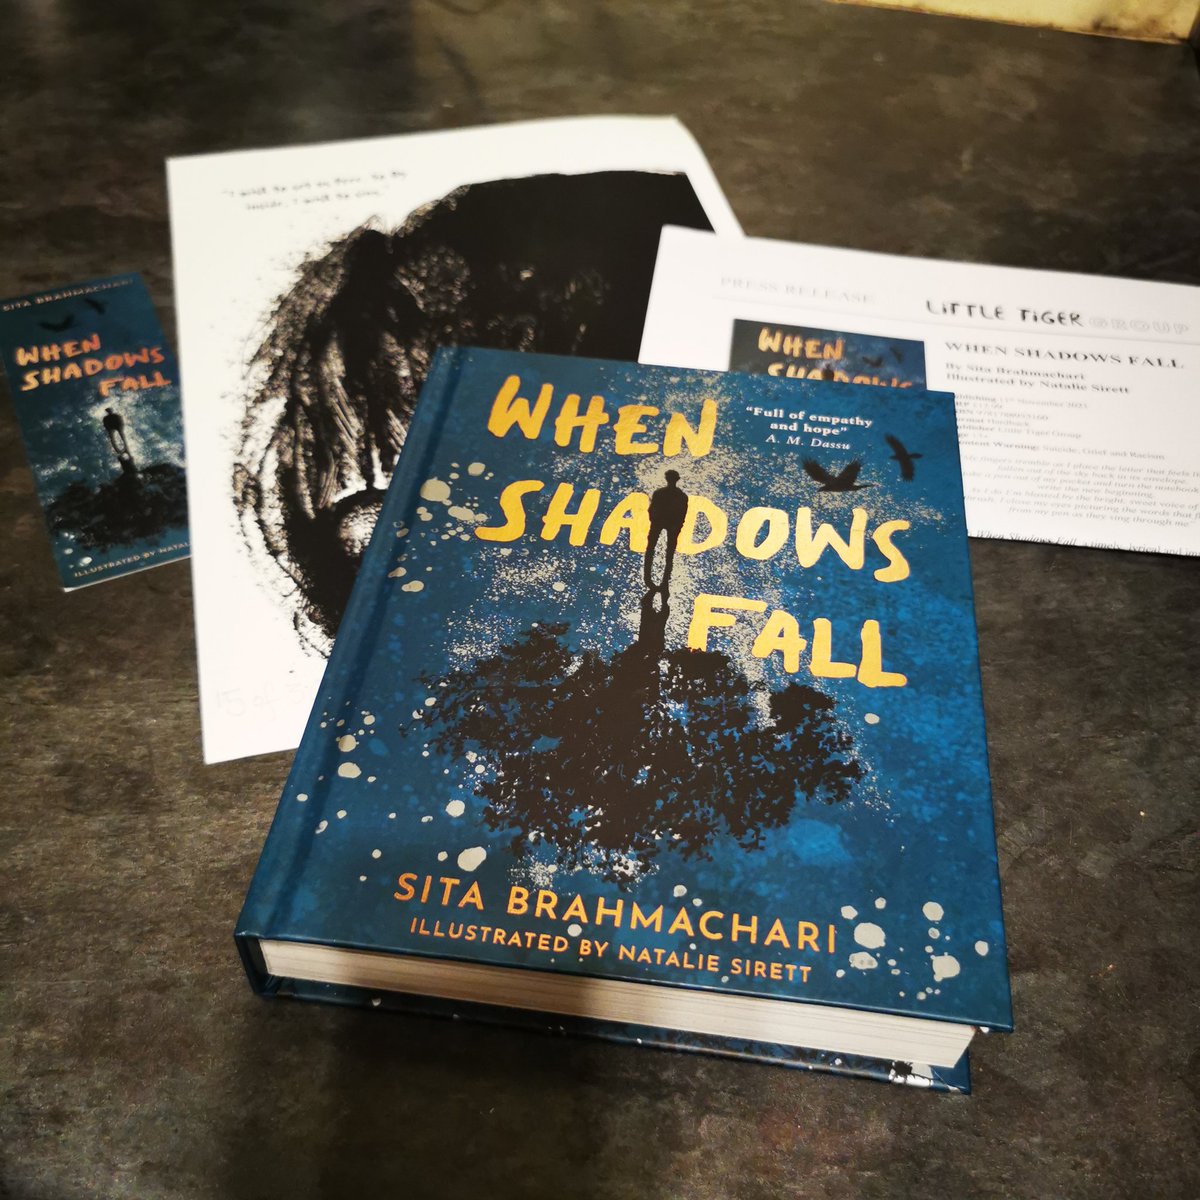 Amazing package from @LittleTigerUK @ninadouglas #whenshadowsfall
Something special is coming next month for this book and I'm pretty excited. The book is stunning inside too. Thank you for the brilliant package #gifted